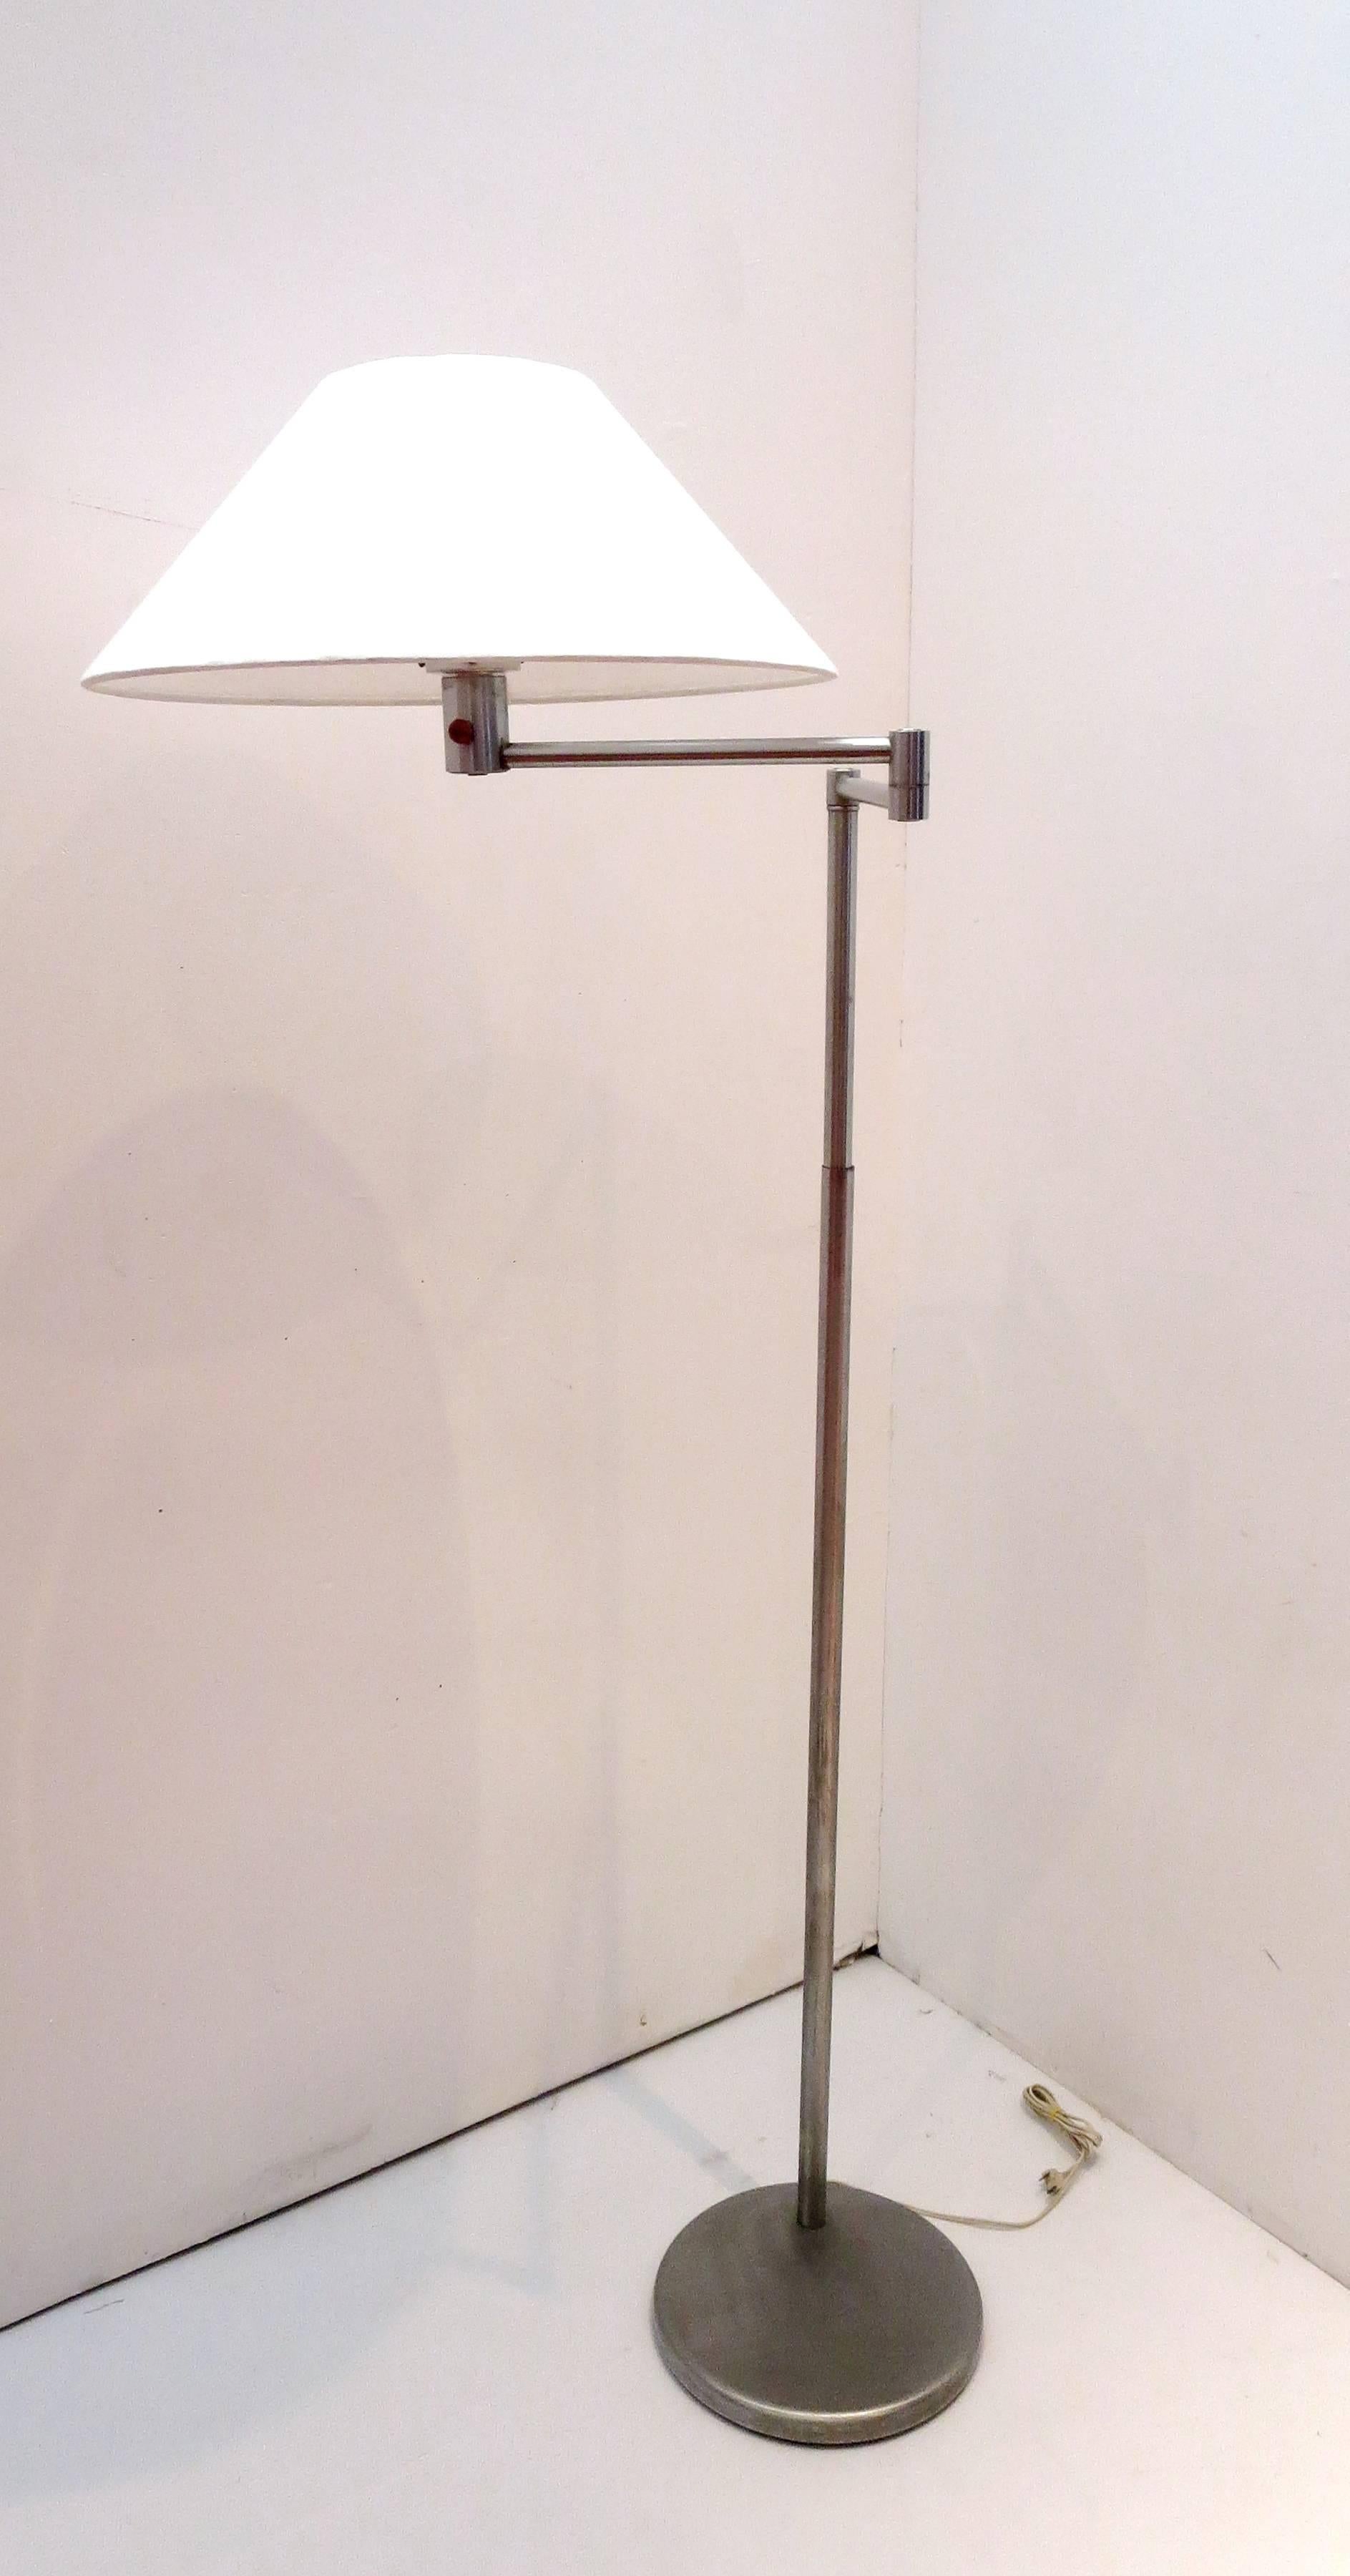  Adjustable Walter Von Nessen Swing Arm Lamp Early Production  1